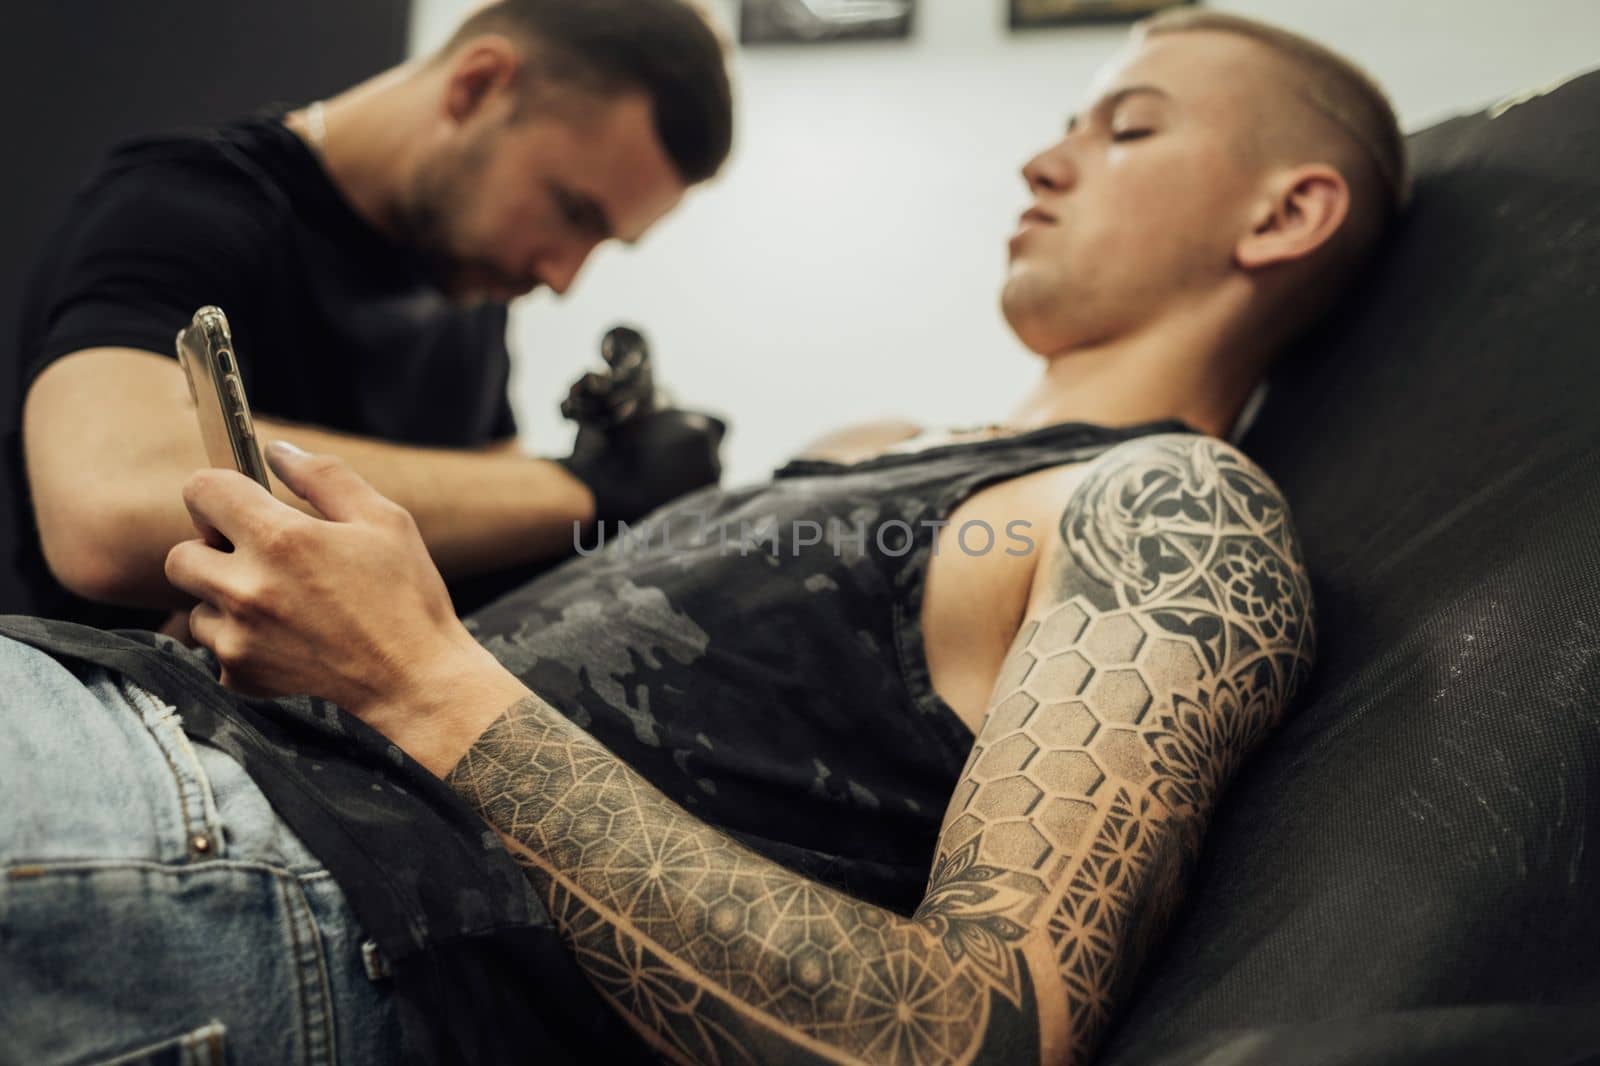 Tattooed Man Using Smartphone During Tattoo Session, Male Artist Draws on Clients Skin